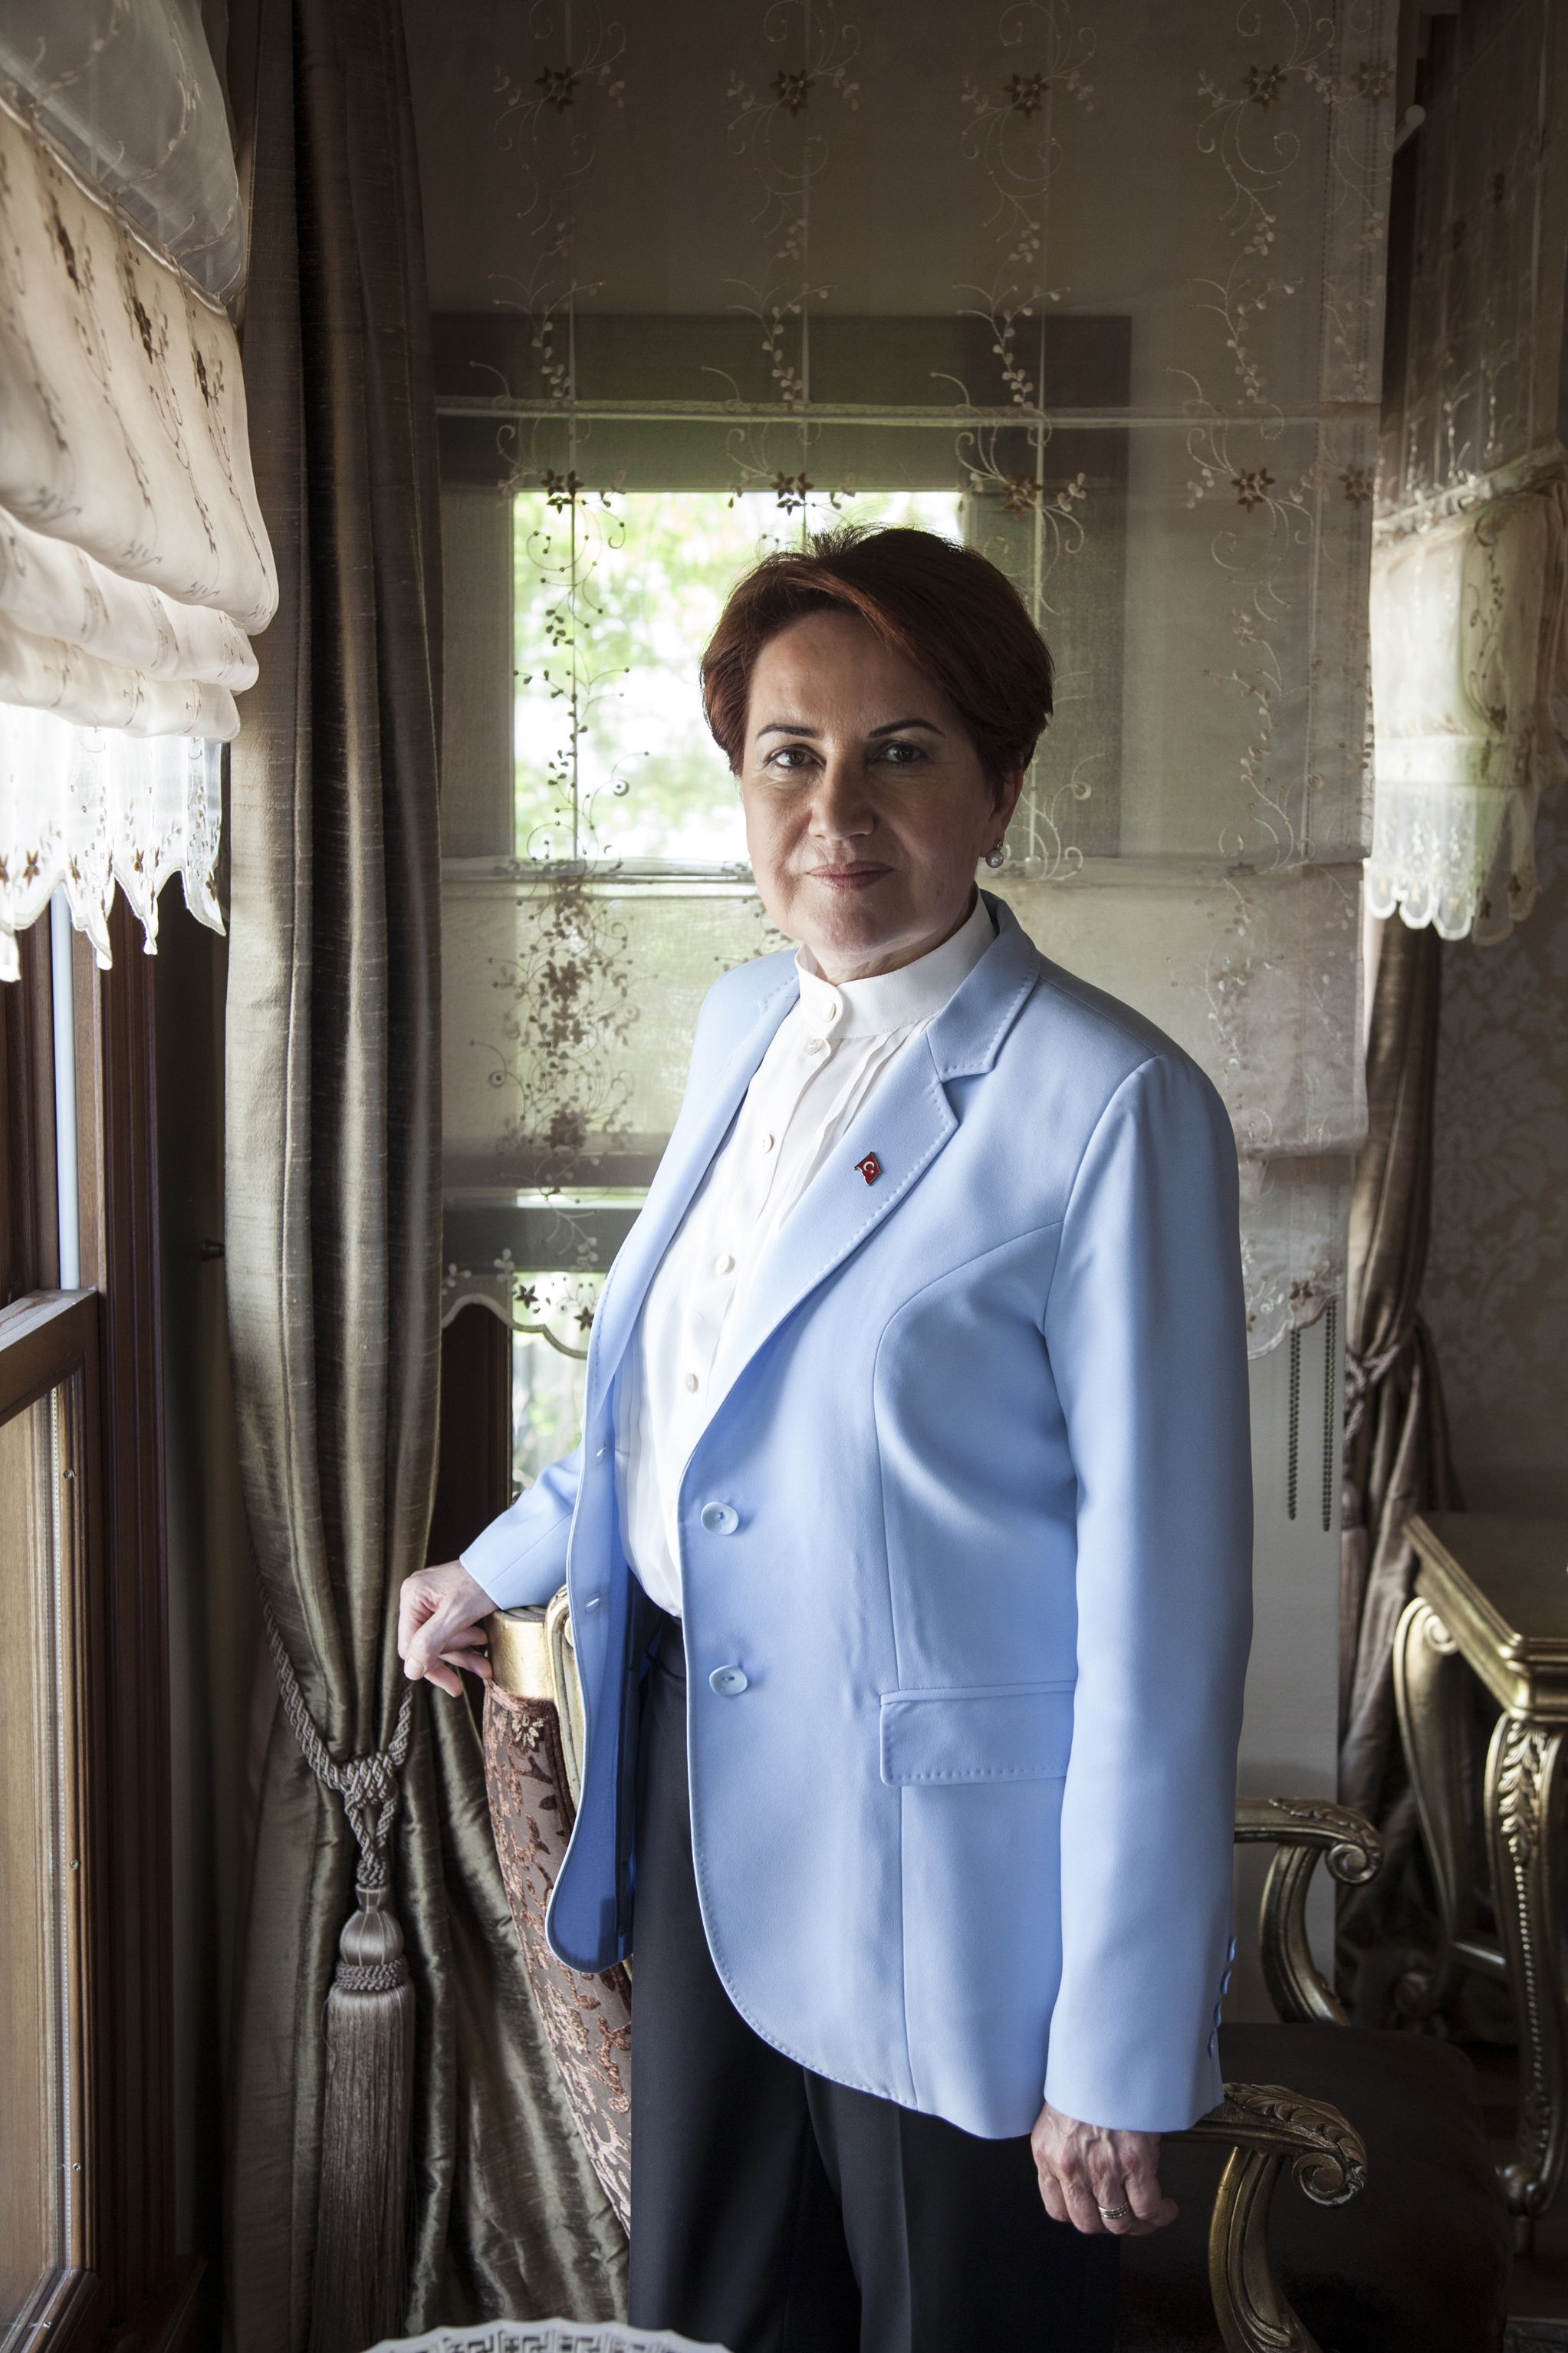 Turkish politician Meral Akşener at her home in Istanbul in May 2017.